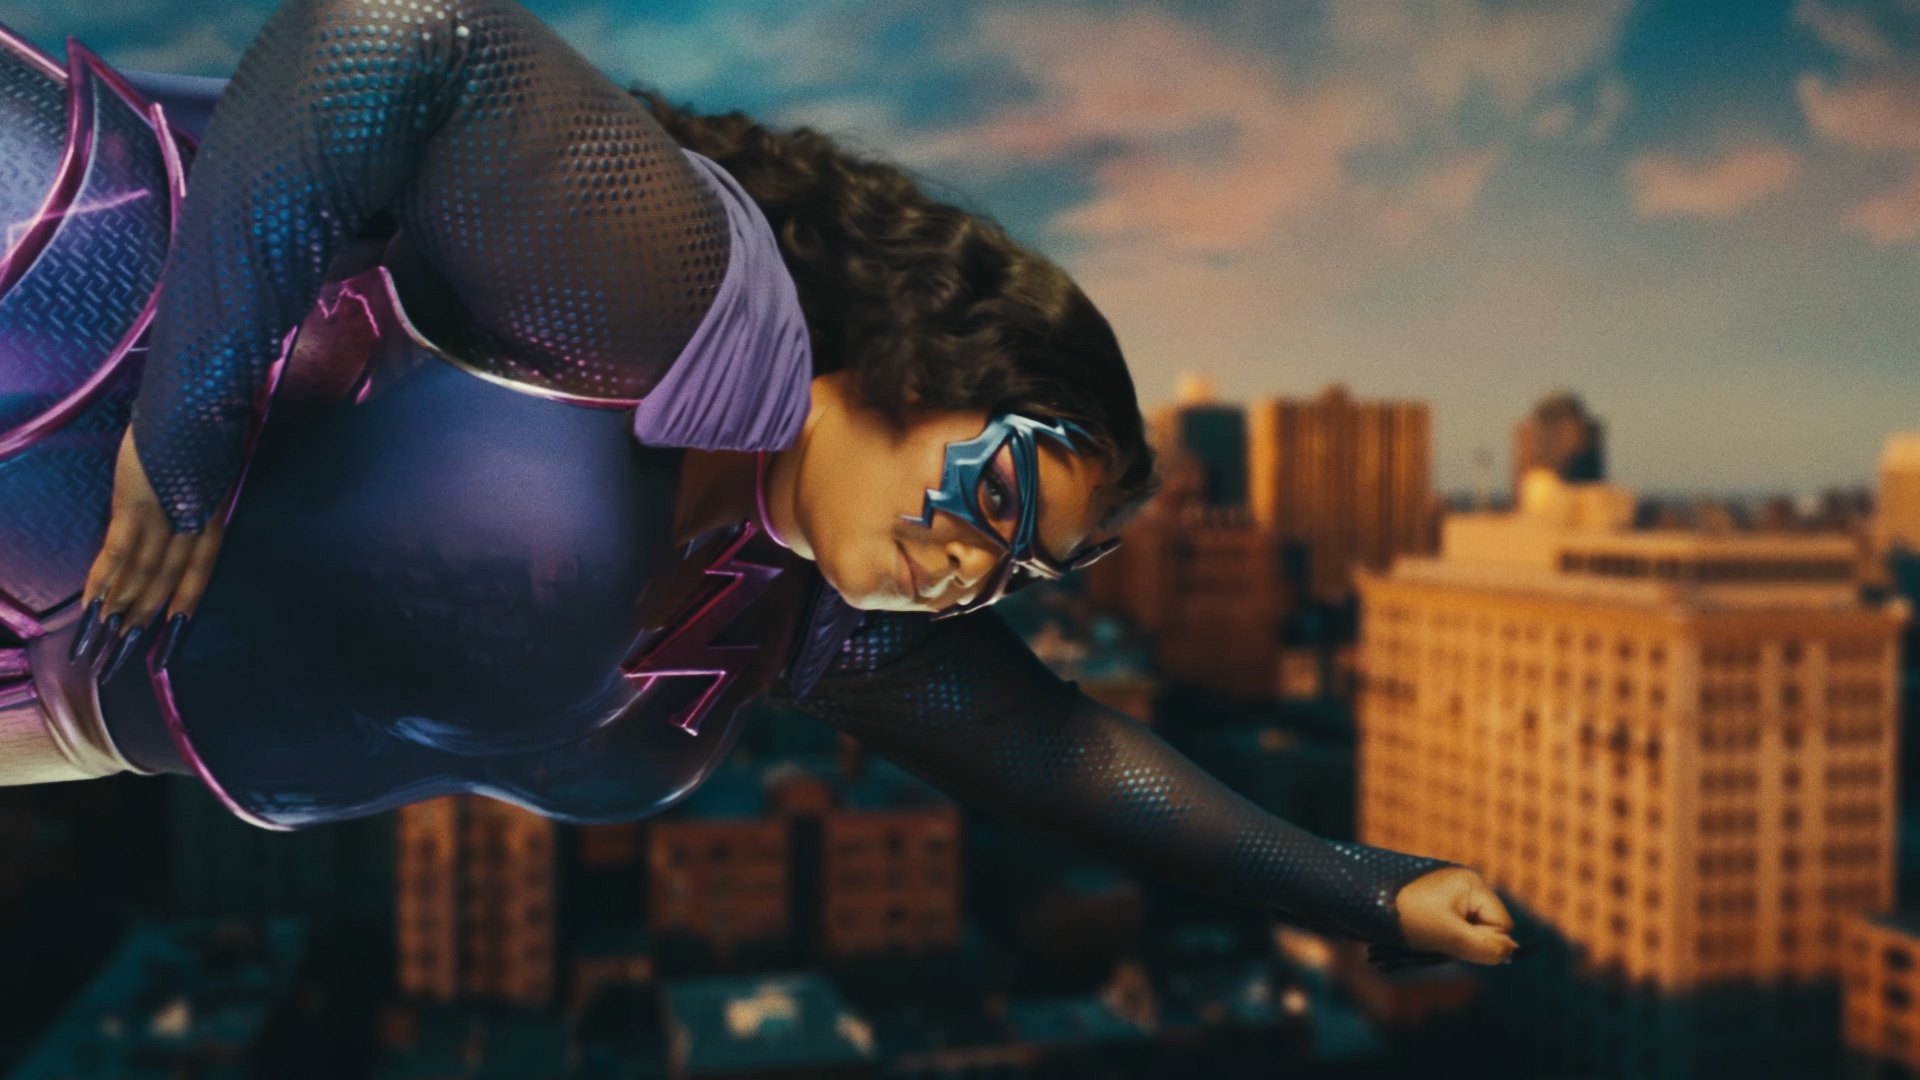 From the ‘Special’ music video: Lizzo is dressed as a superhero and flies above a city